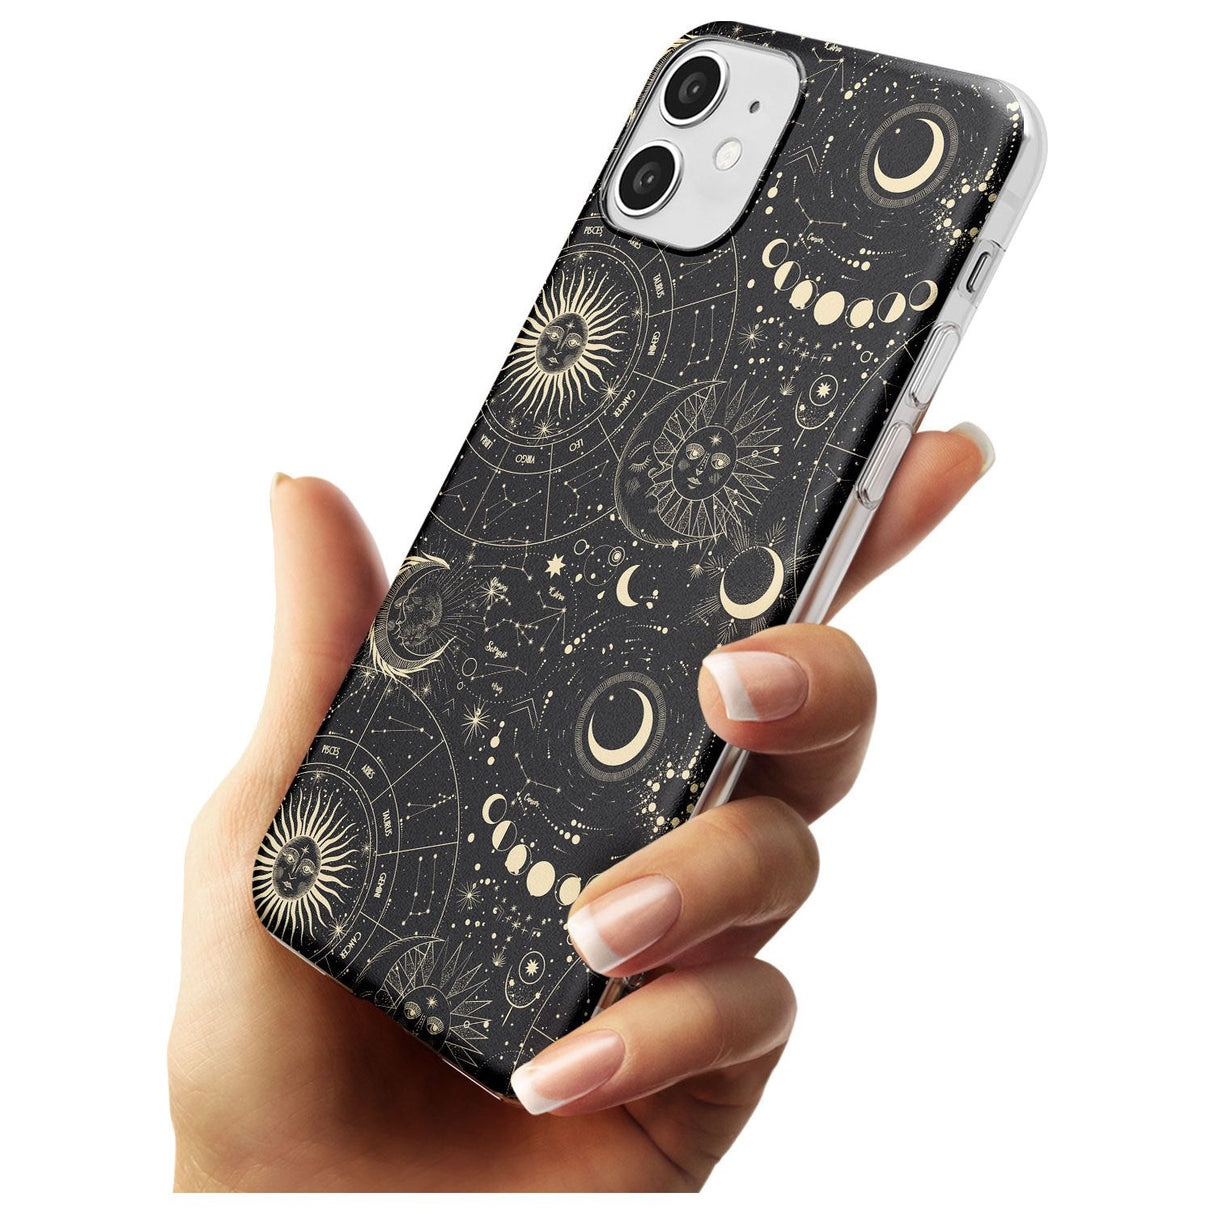 Suns, Moons & Star Signs Black Impact Phone Case for iPhone 11